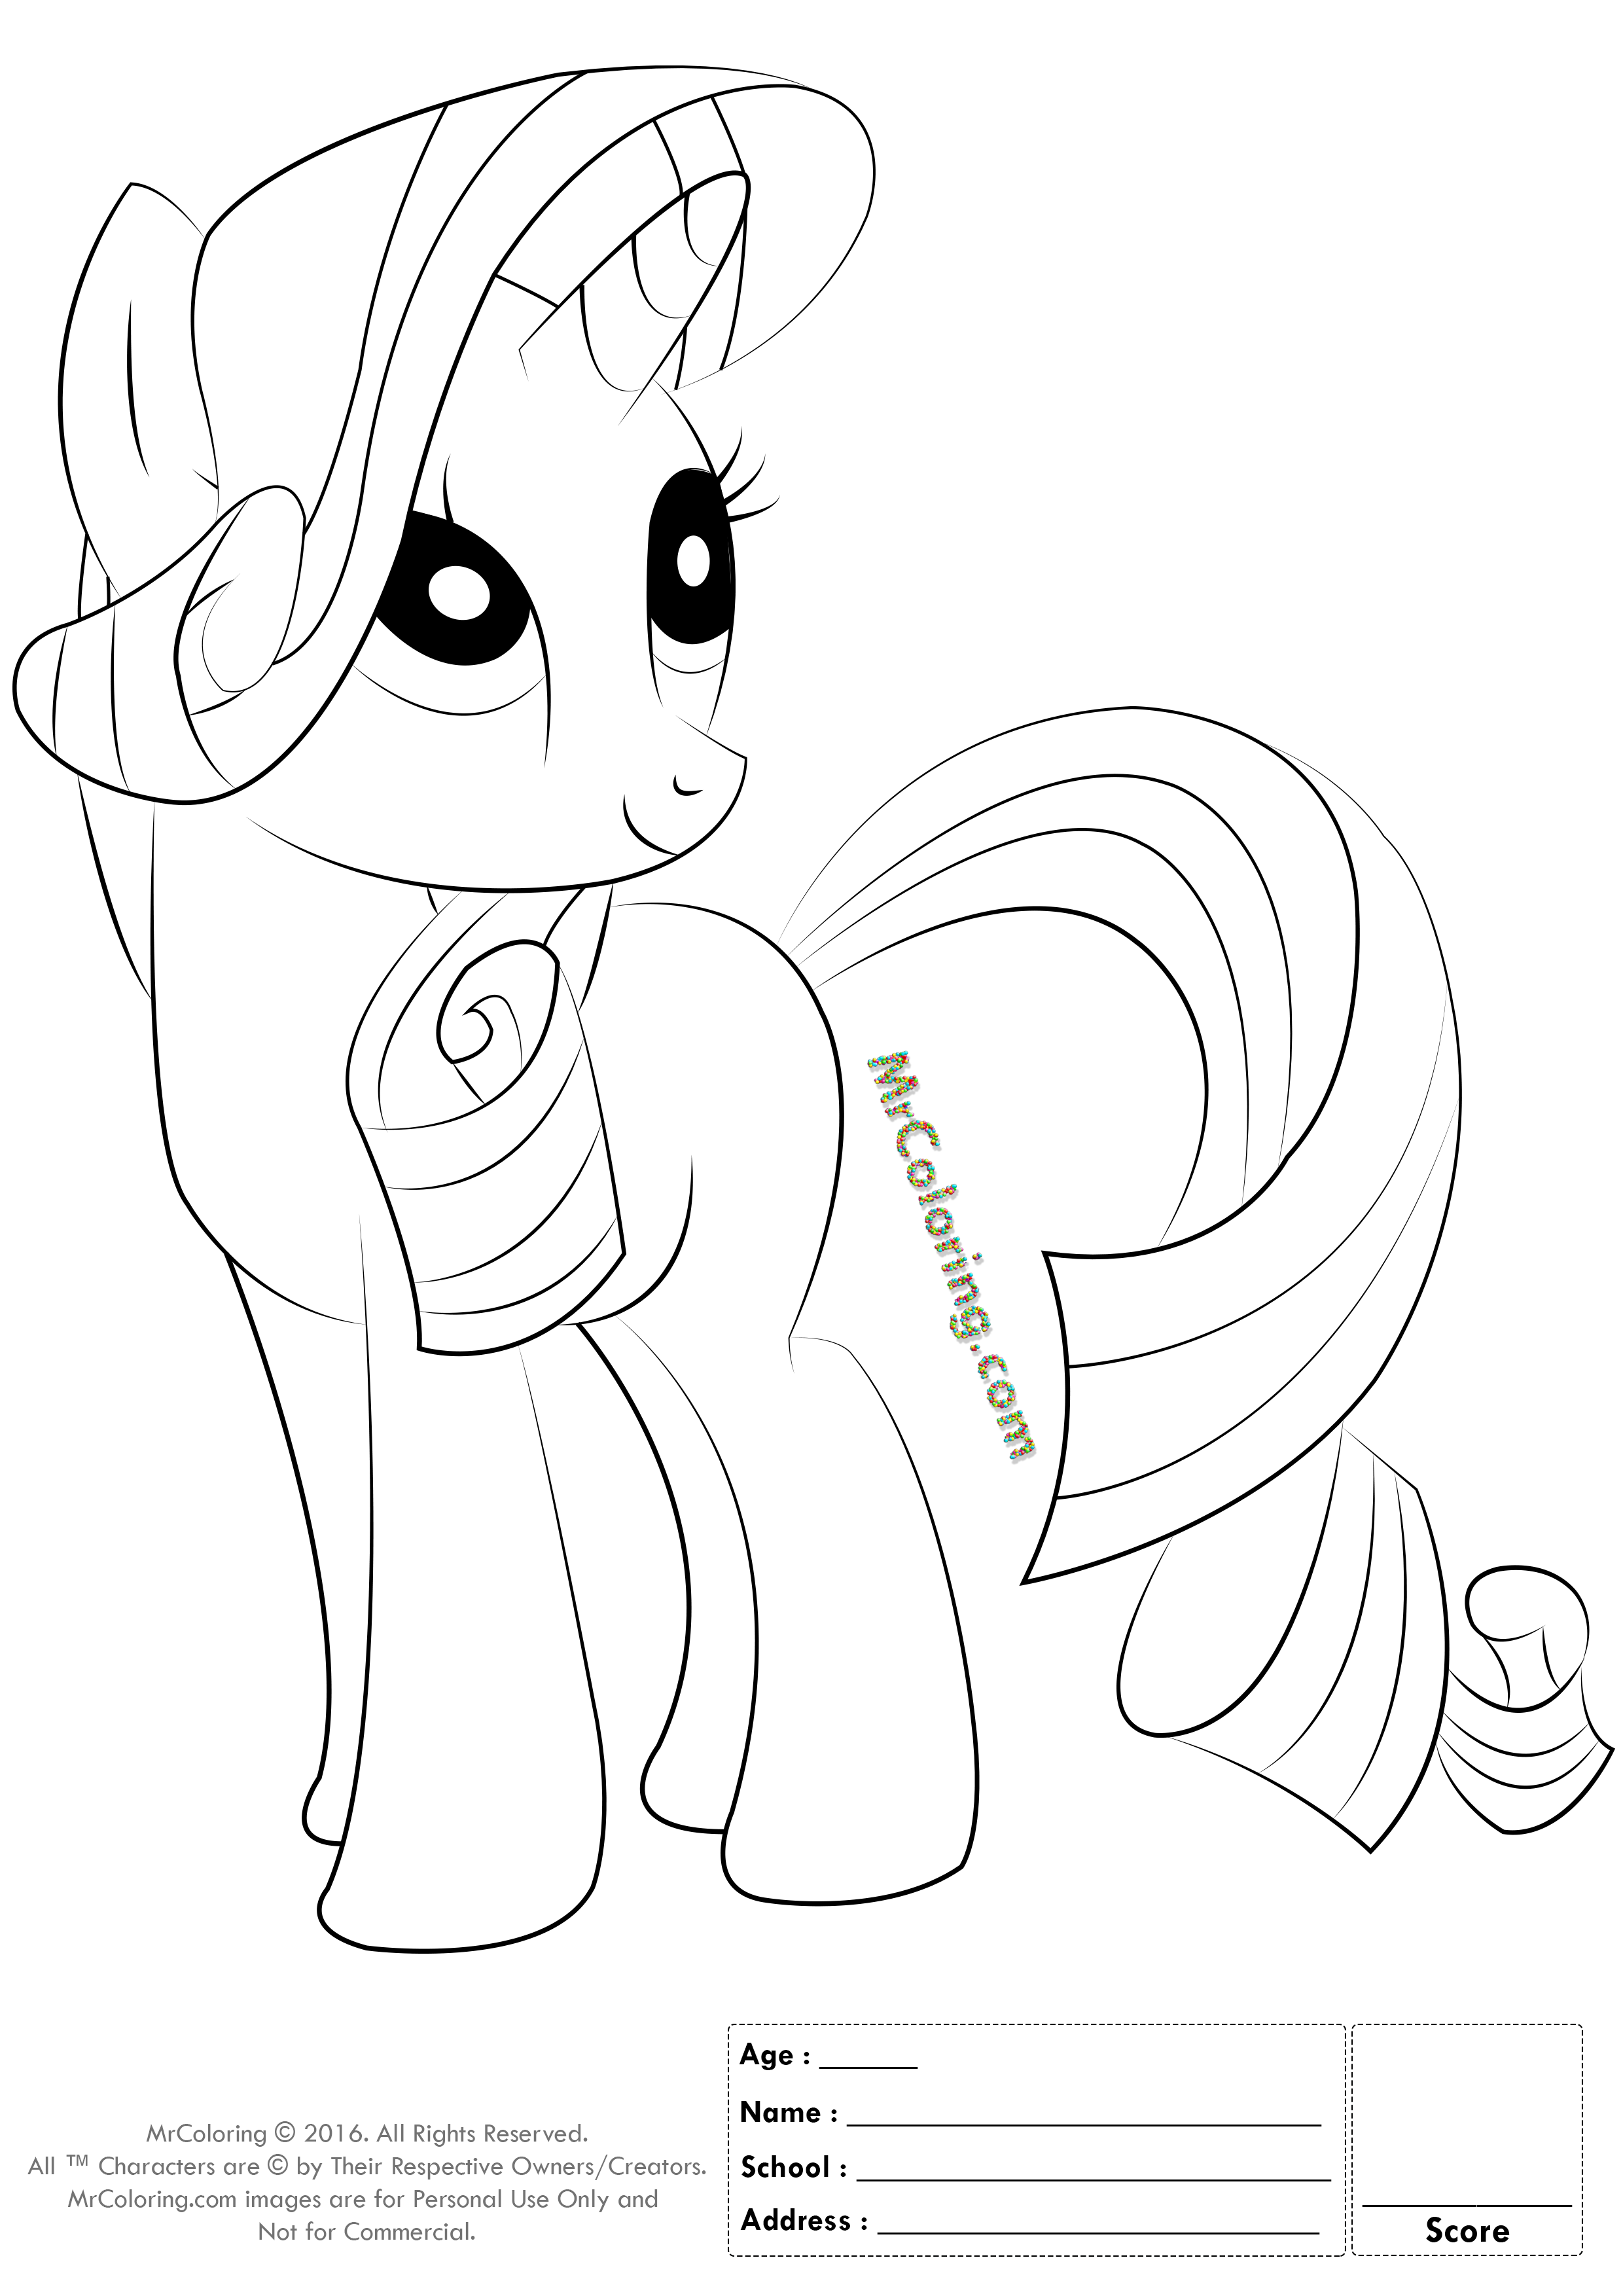 My Little Pony Rarity Coloring Pages - 1 | MrColoring.com